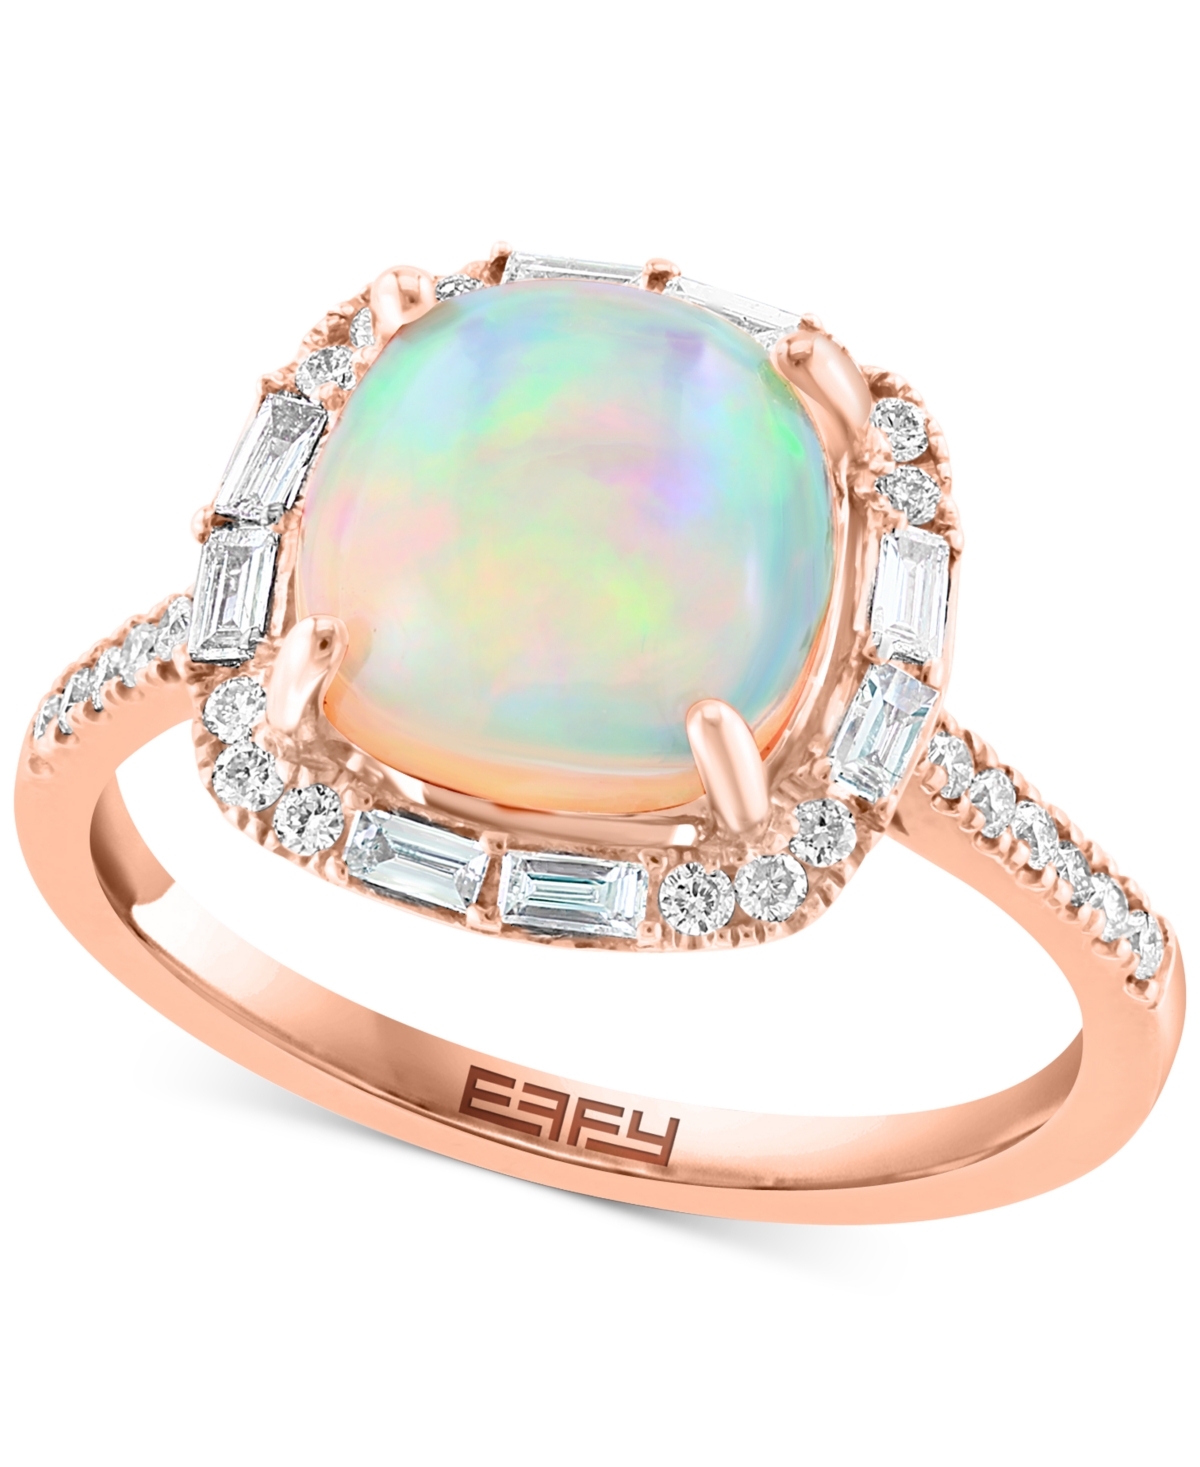 Effy Collection Effy Ethiopian Opal (2-1/3 Ct. T.w.) & Diamond (3/8 Ct. T.w.) Ring In 14k Rose Gold